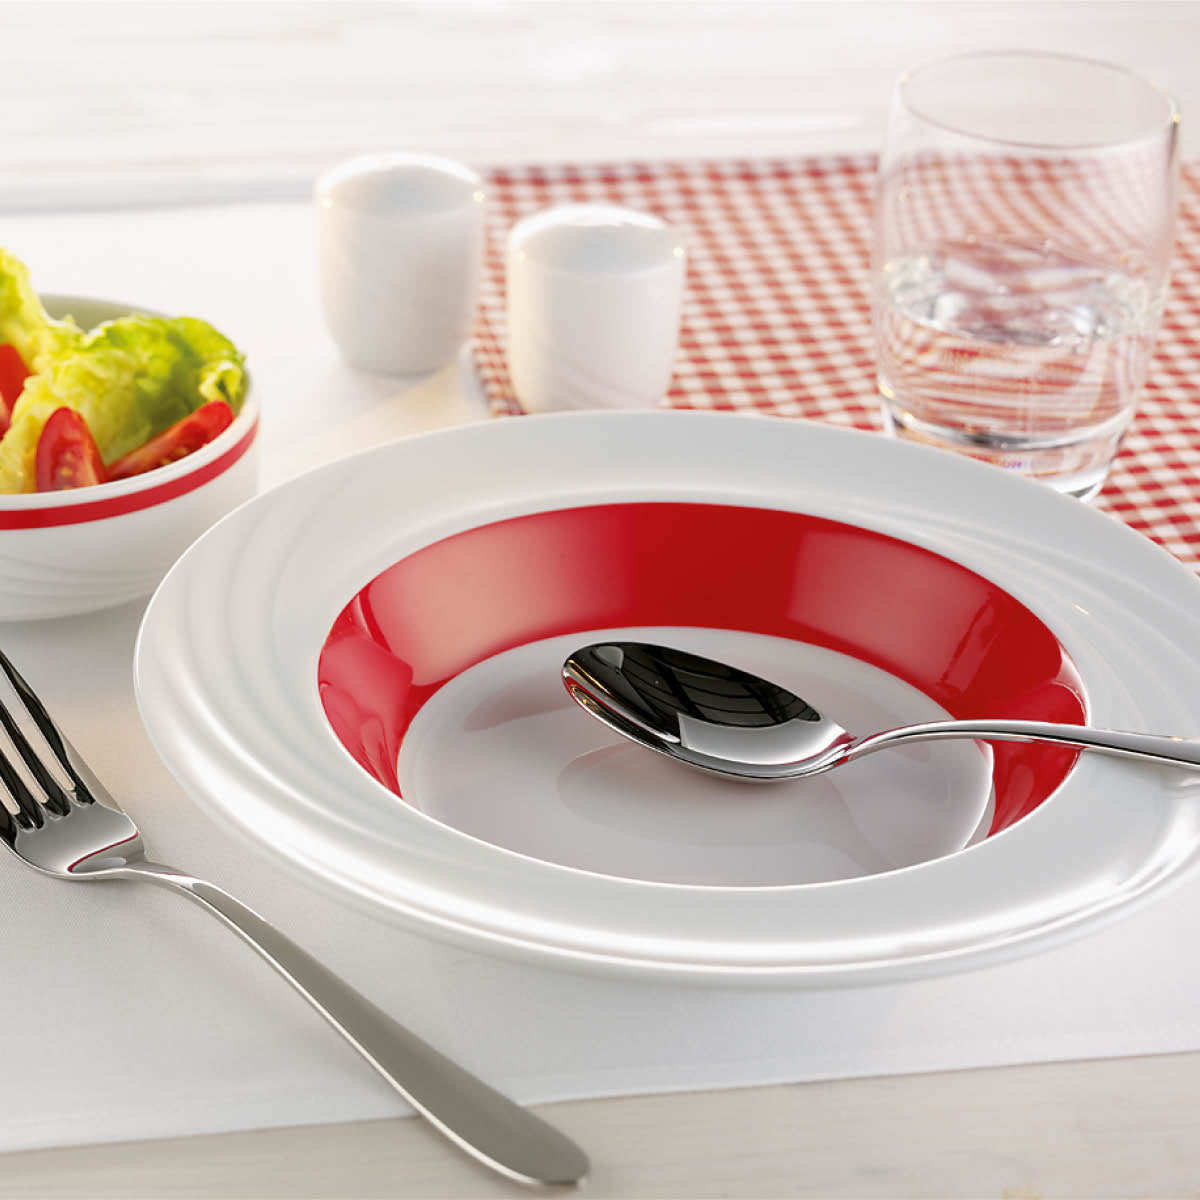 SH9180016/62931 Donna Senior Decor Round Flat Rim Plate with Red Wide Band 160mm Tomkin Australia Hospitality Supplies